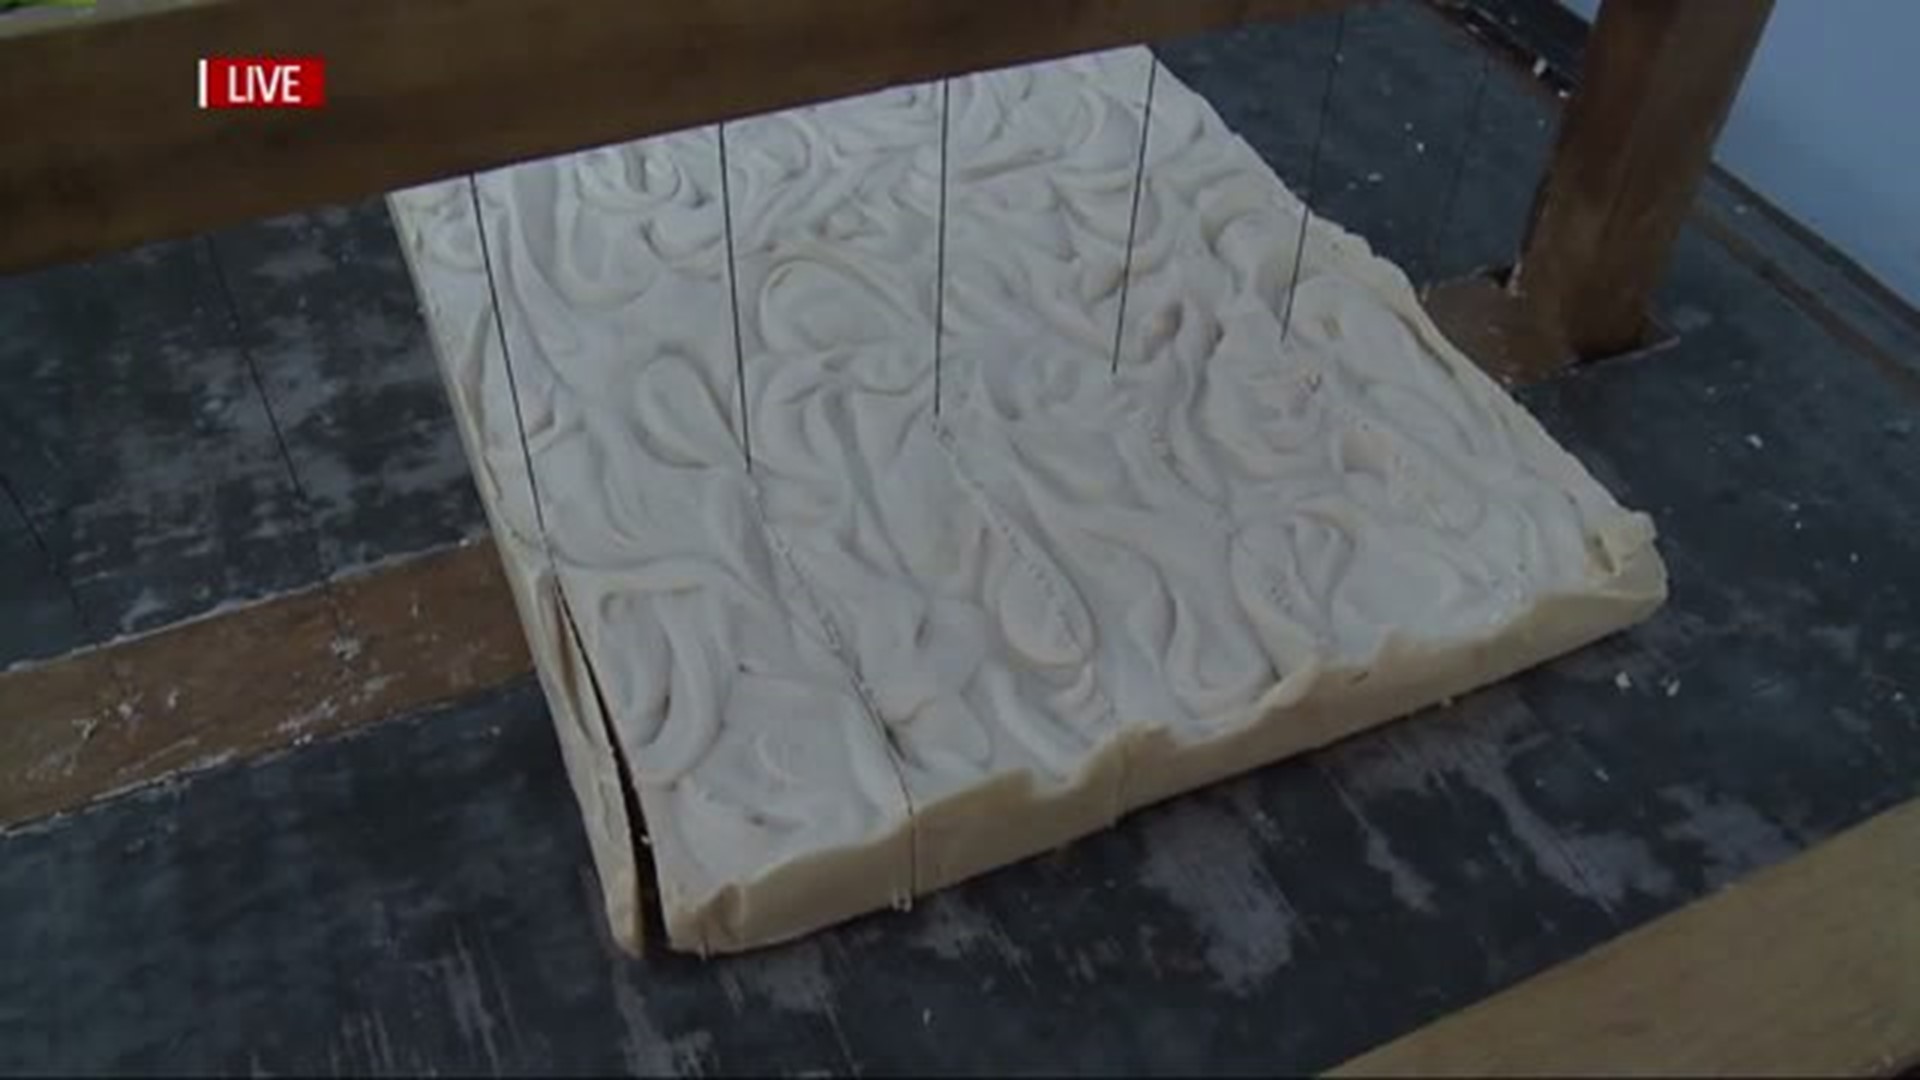 Find out how soap is made at Sunrise Soap Company